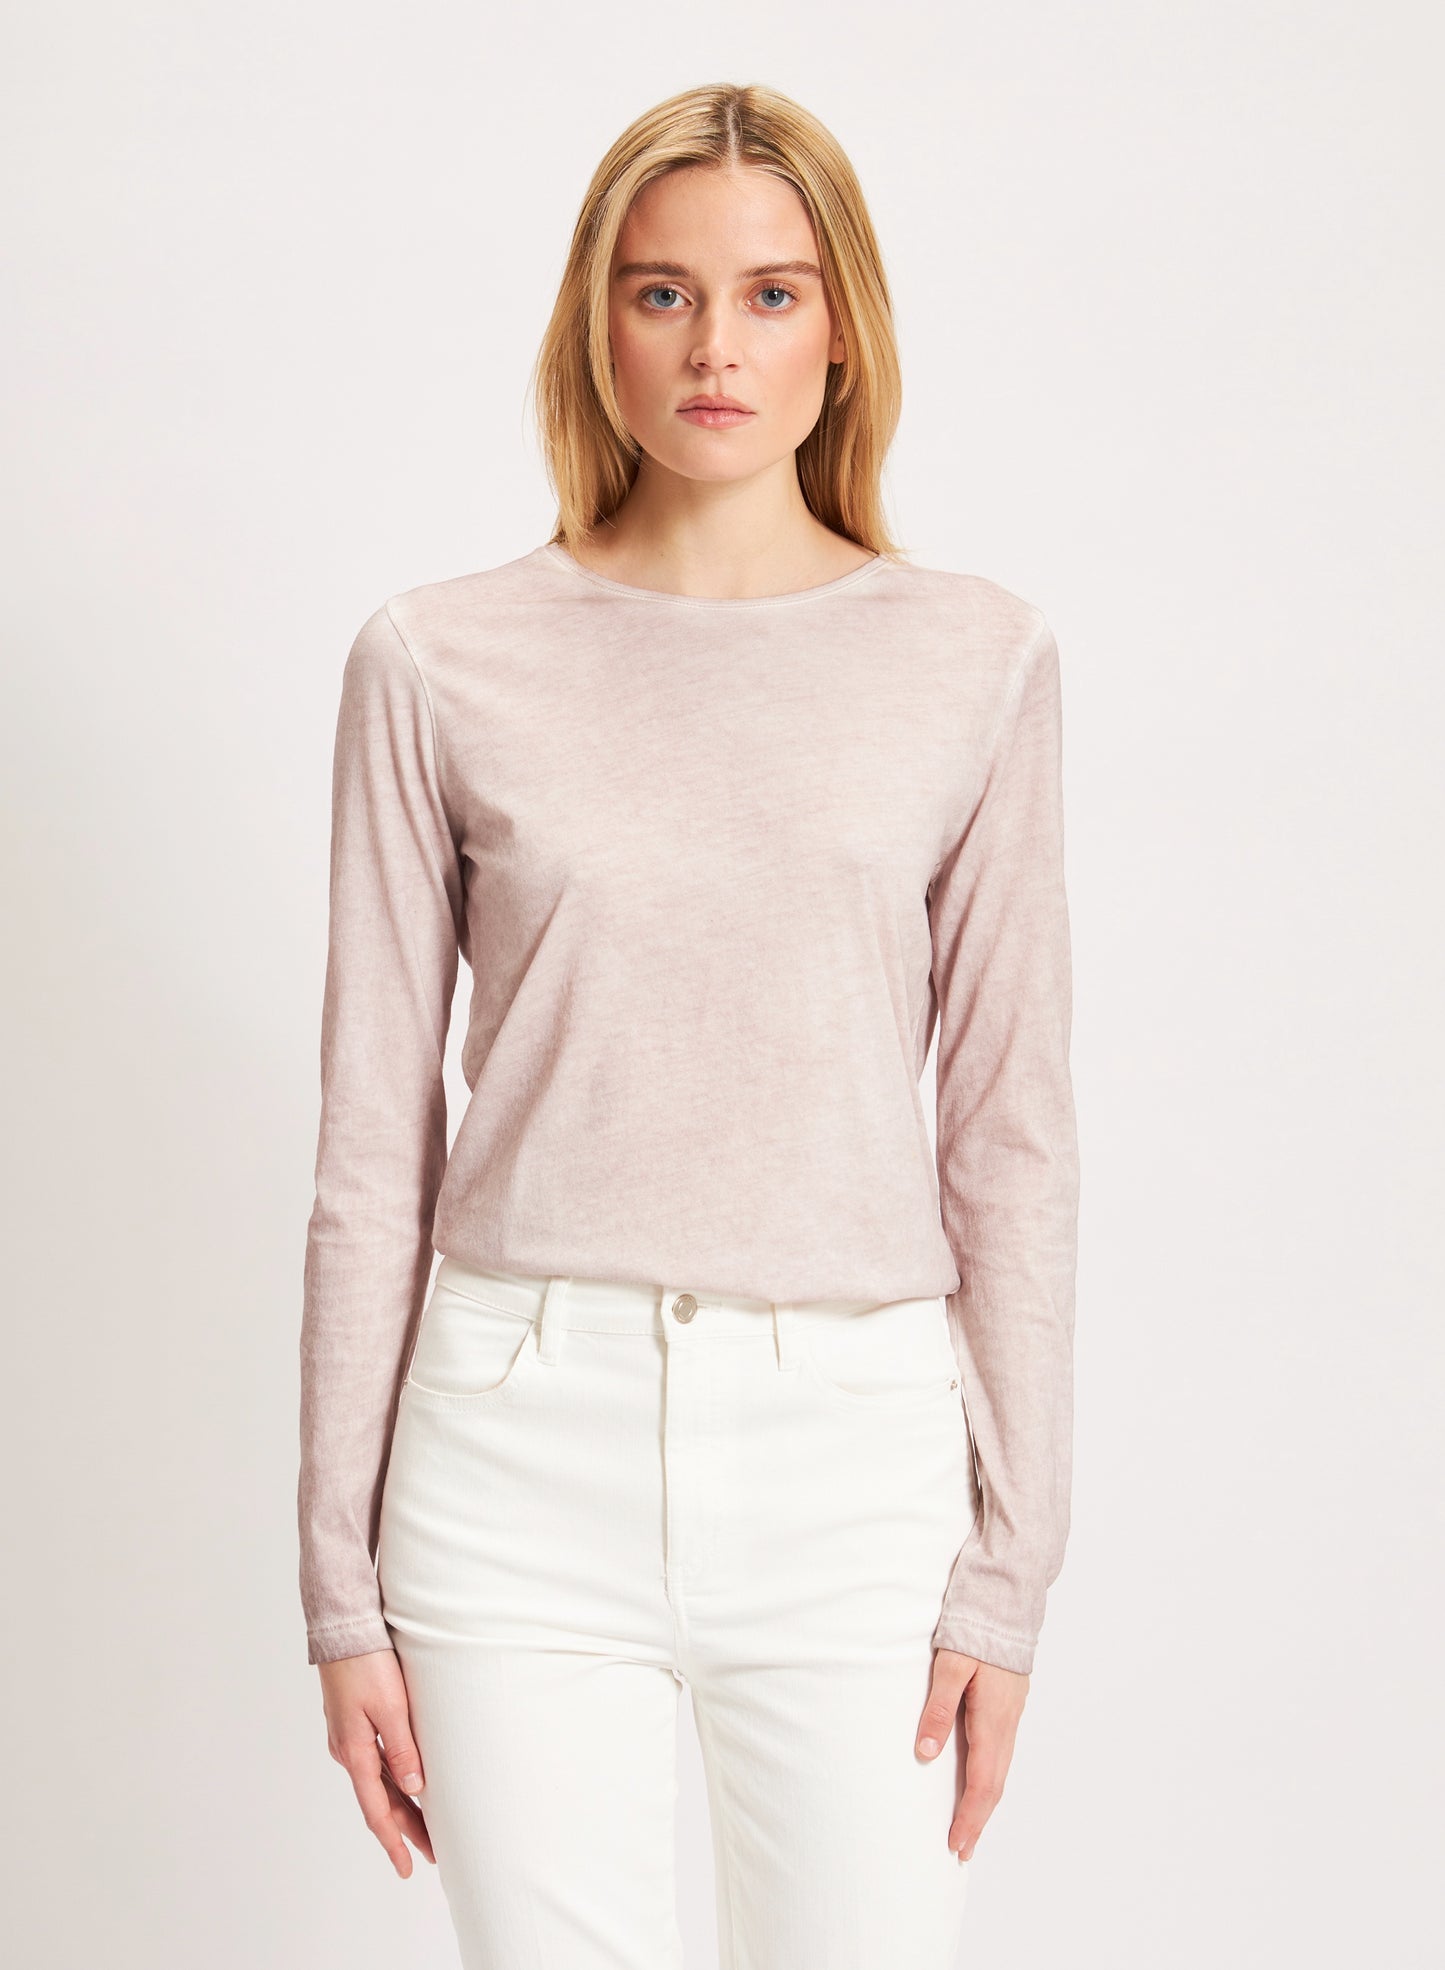 Patrick Assaraf Sublime Classic Crew Long Sleeve Tee in Natural